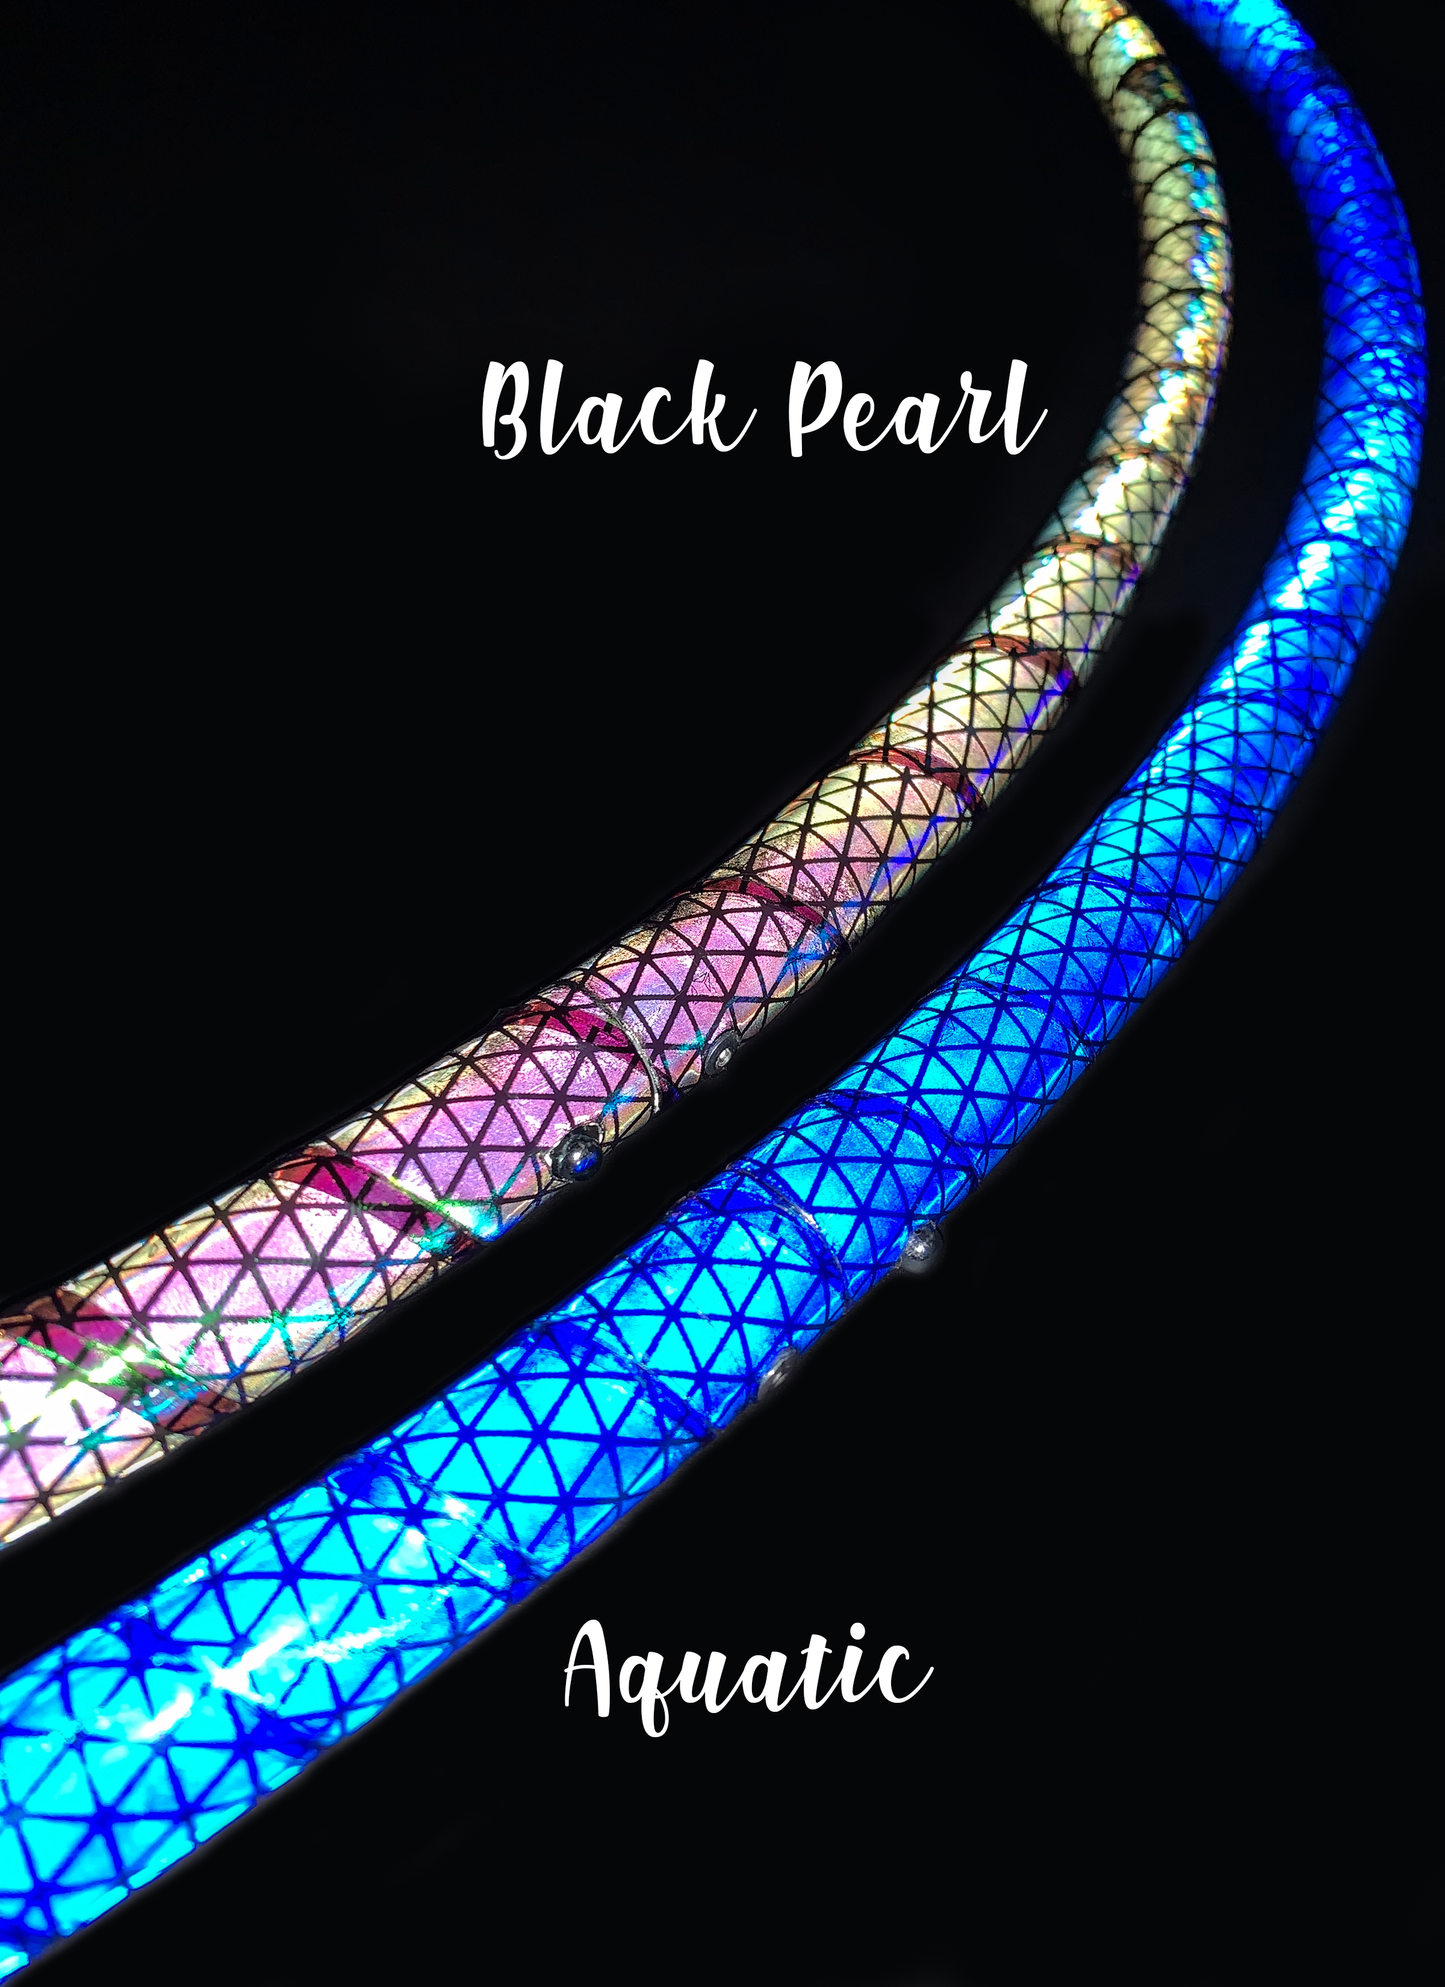 Black Pearl Opalescent Color-Shift Reflective Taped Hoops